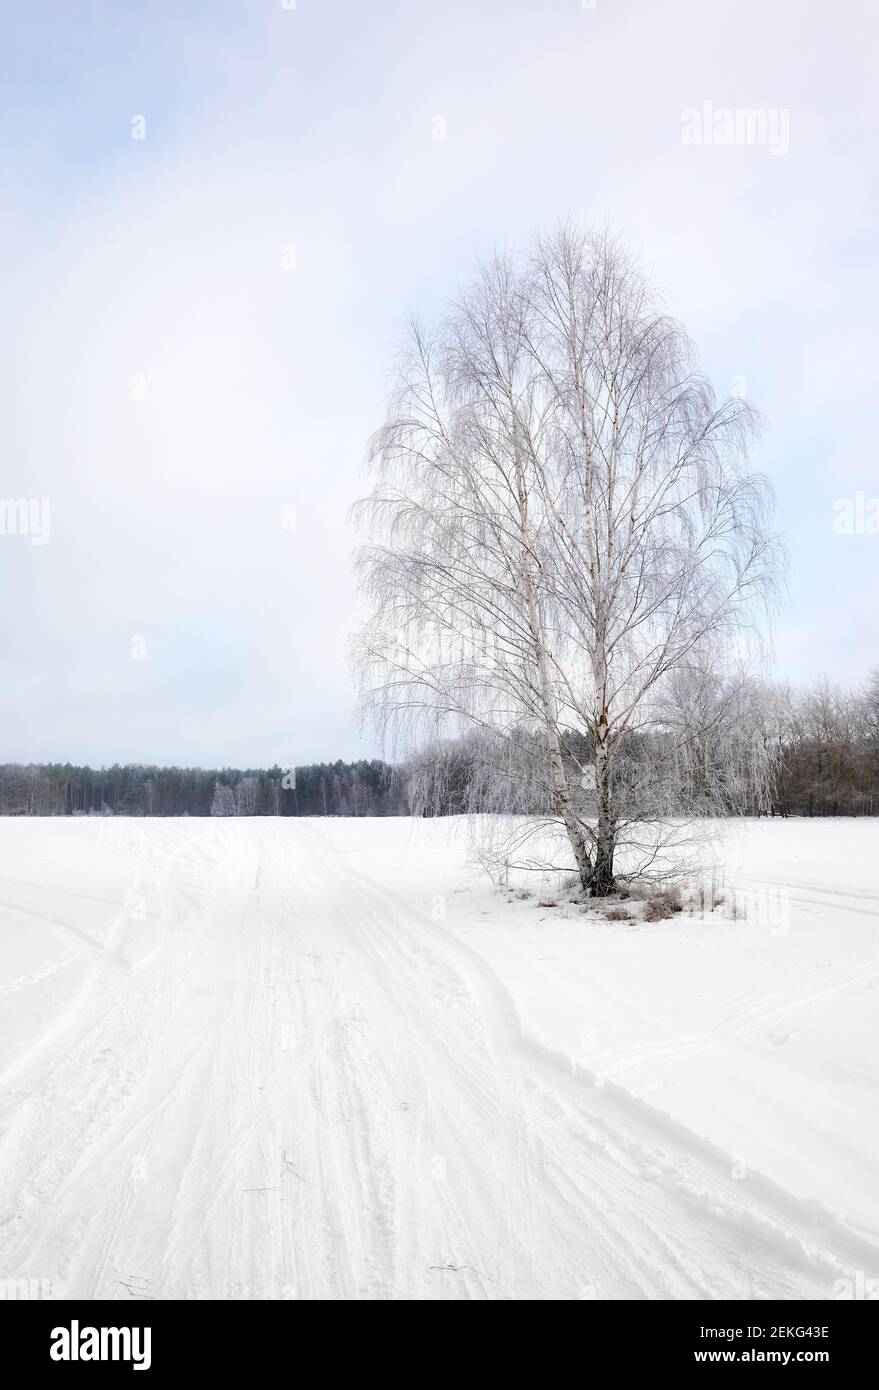 Winter landscape with lonely birch by a country road covered with snow. Stock Photo